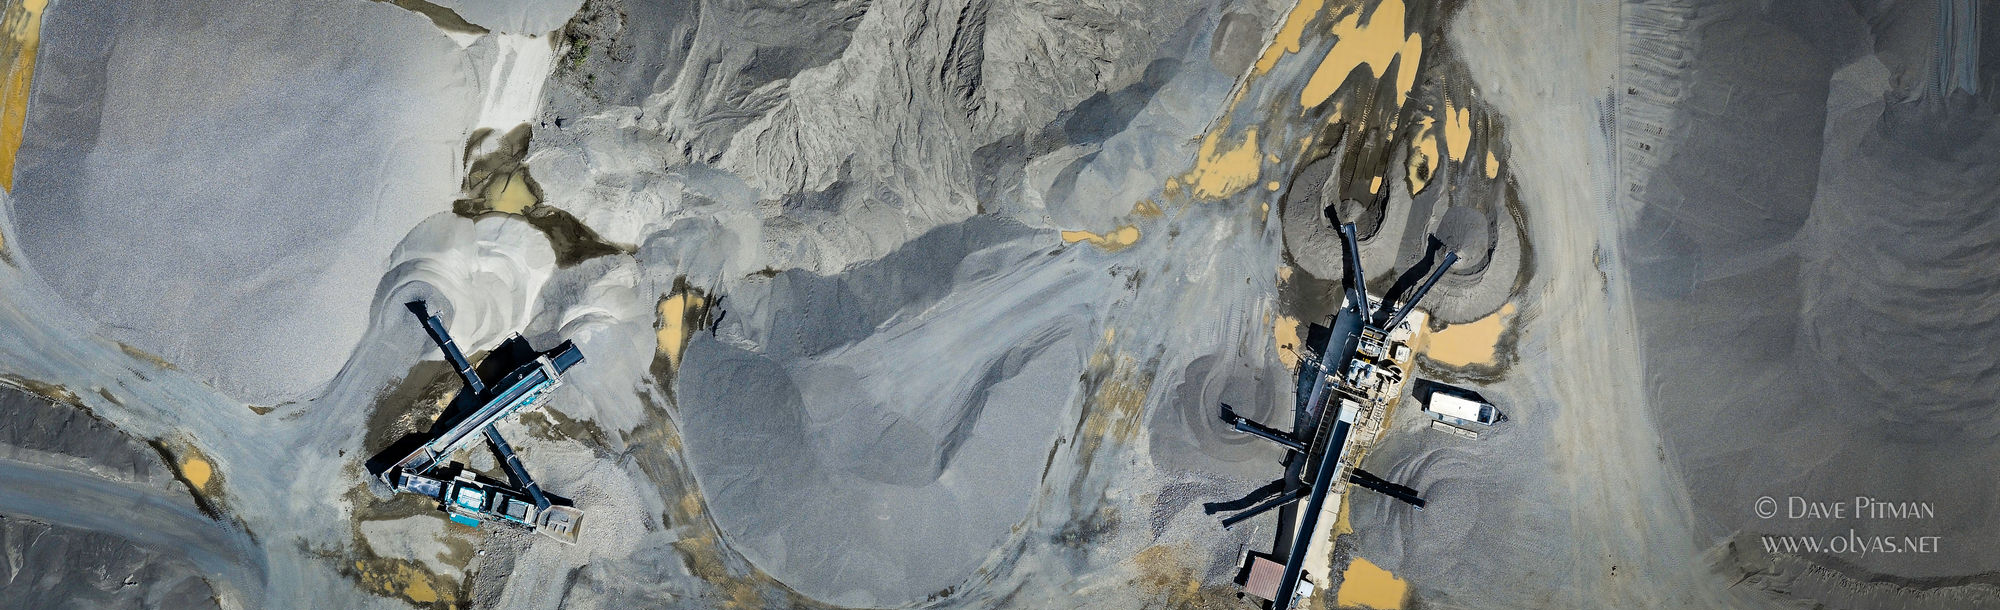 Mining, drone mapping, and drone survey in Washington state